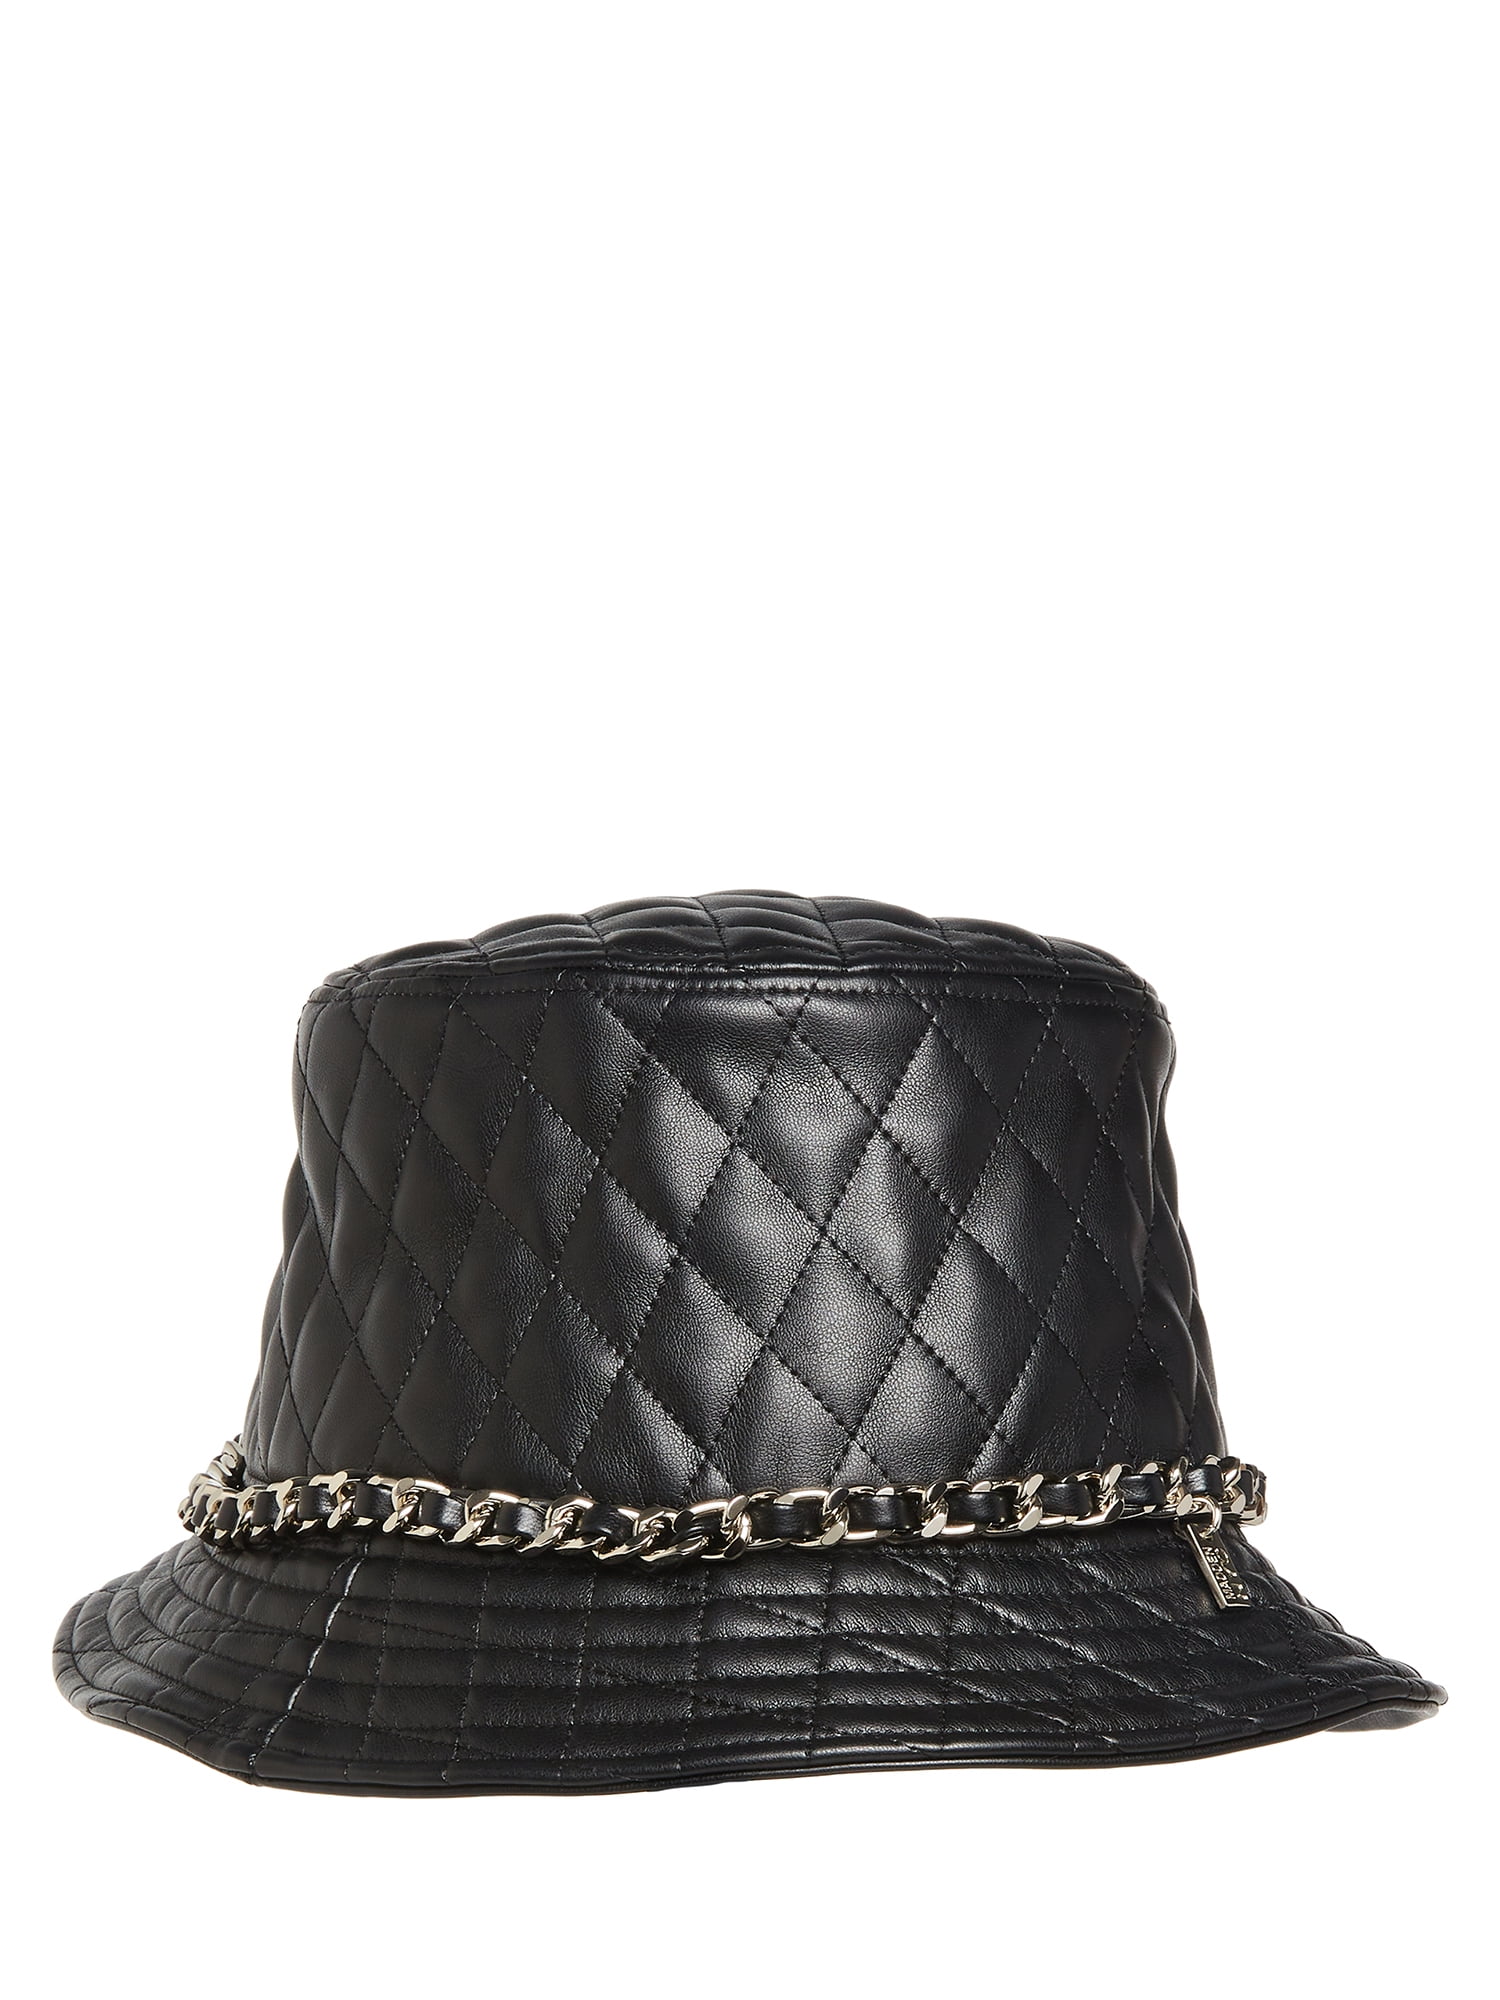 Bucket Hat | Black | The New York Times Store